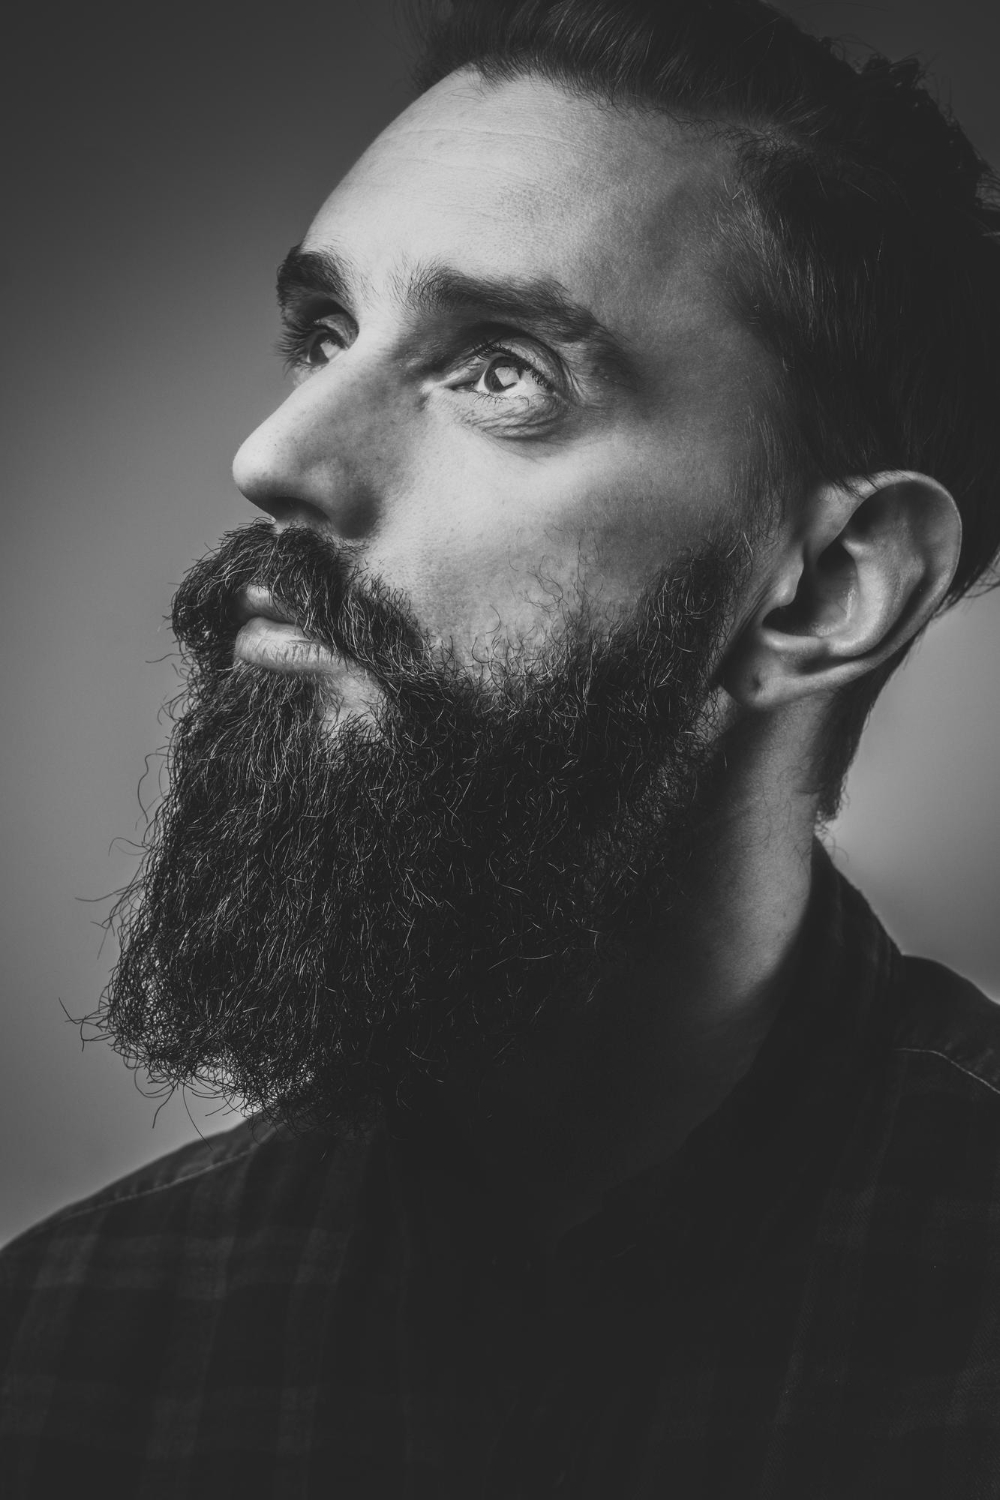 closeup-photo-shoot-of-pensive-man-with-beard-black-and-white-photo-with-low-contrast